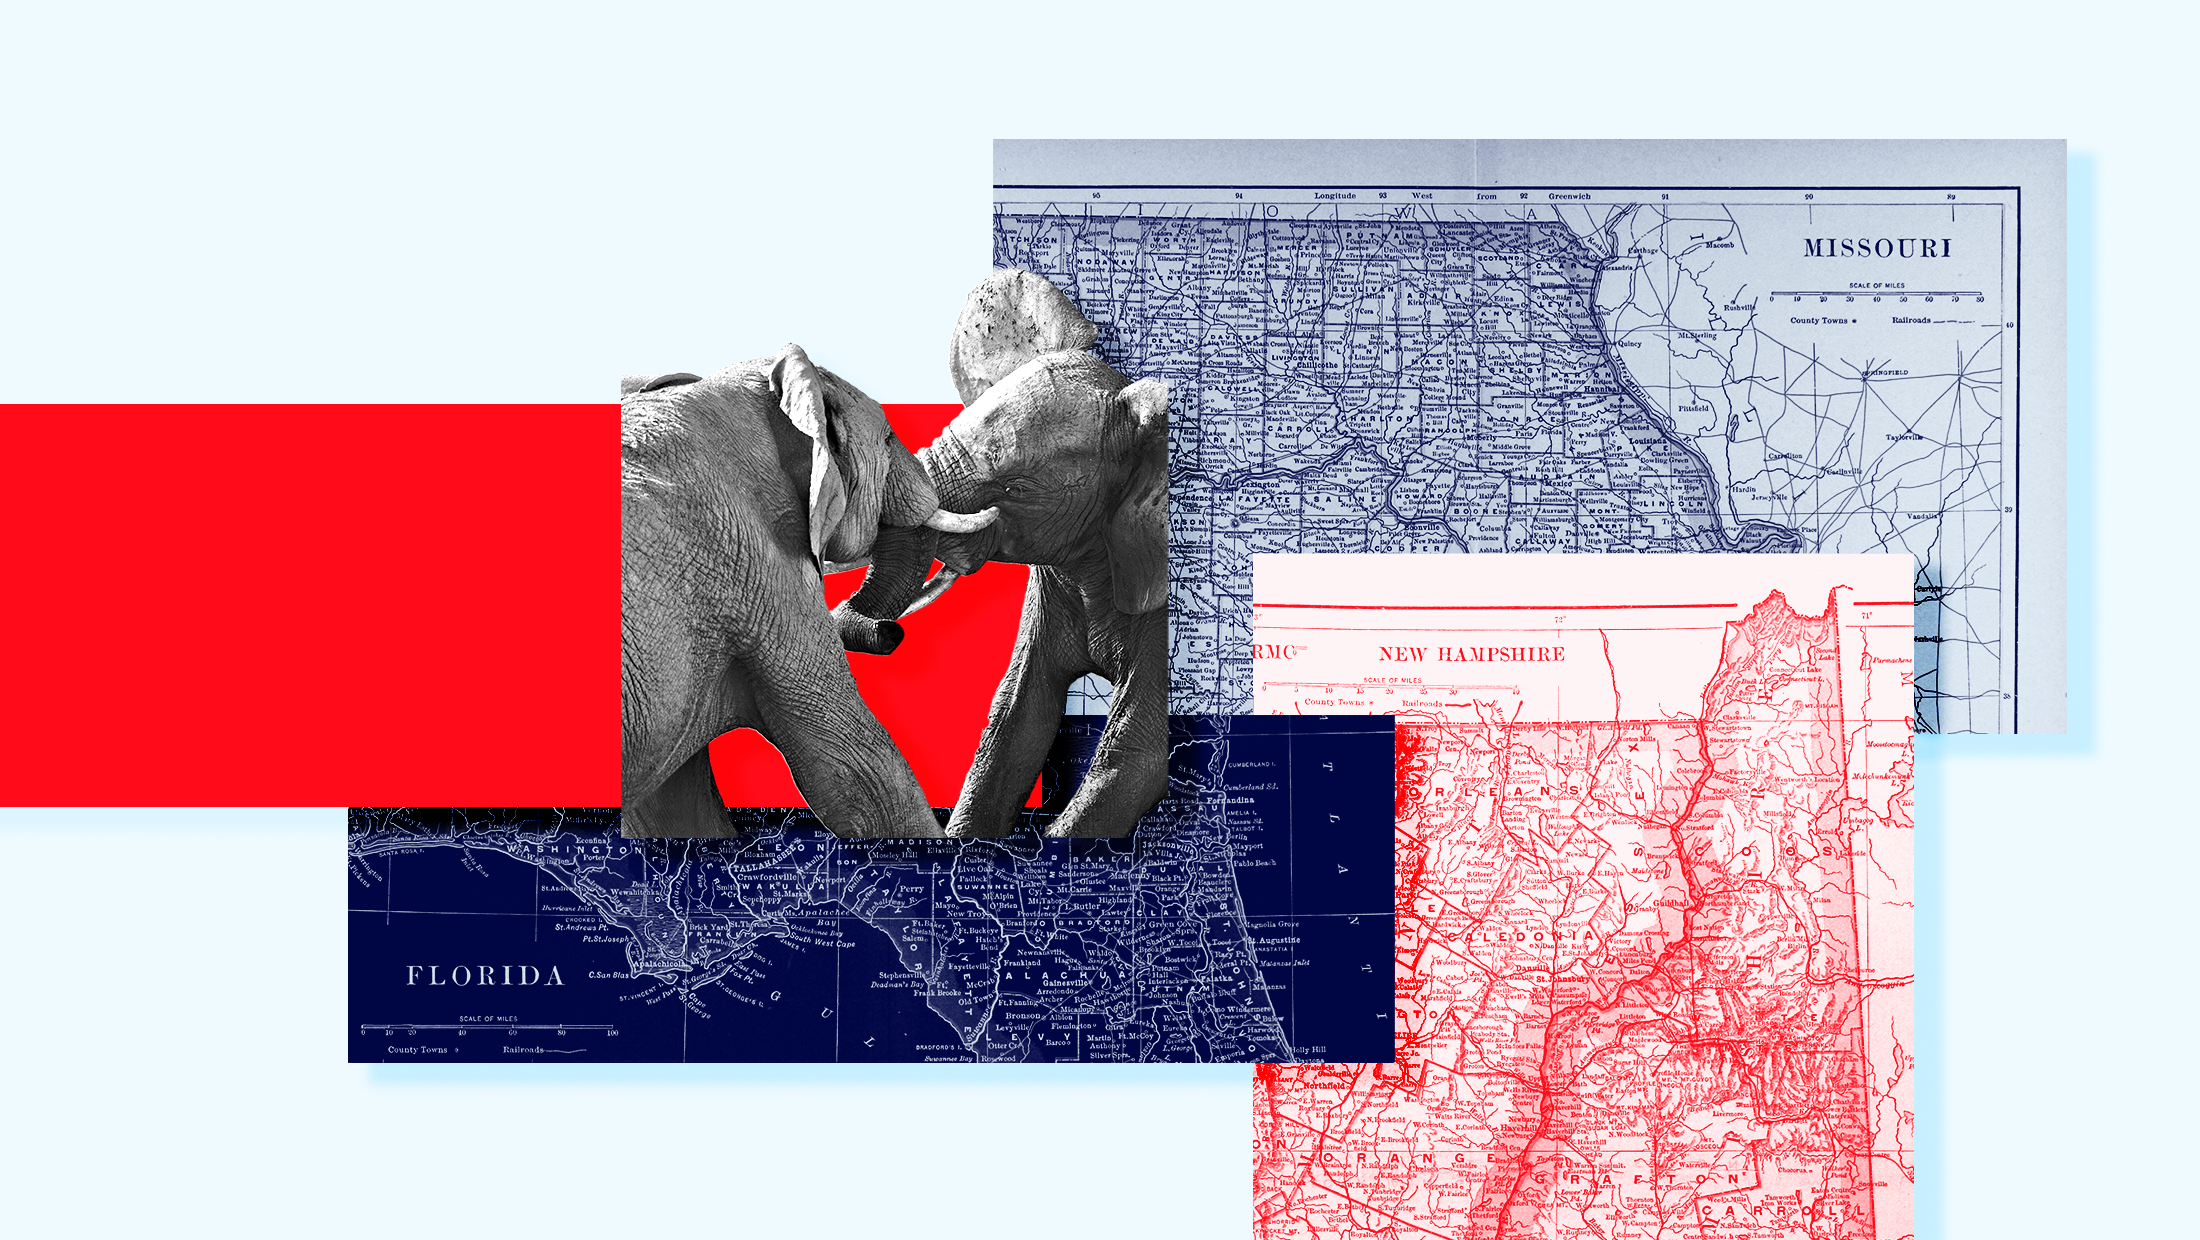 Two elephants fighting superimposed over antique maps of Florida, Missouri and New Hampshire colored dark blue, light blue and light red respectively.